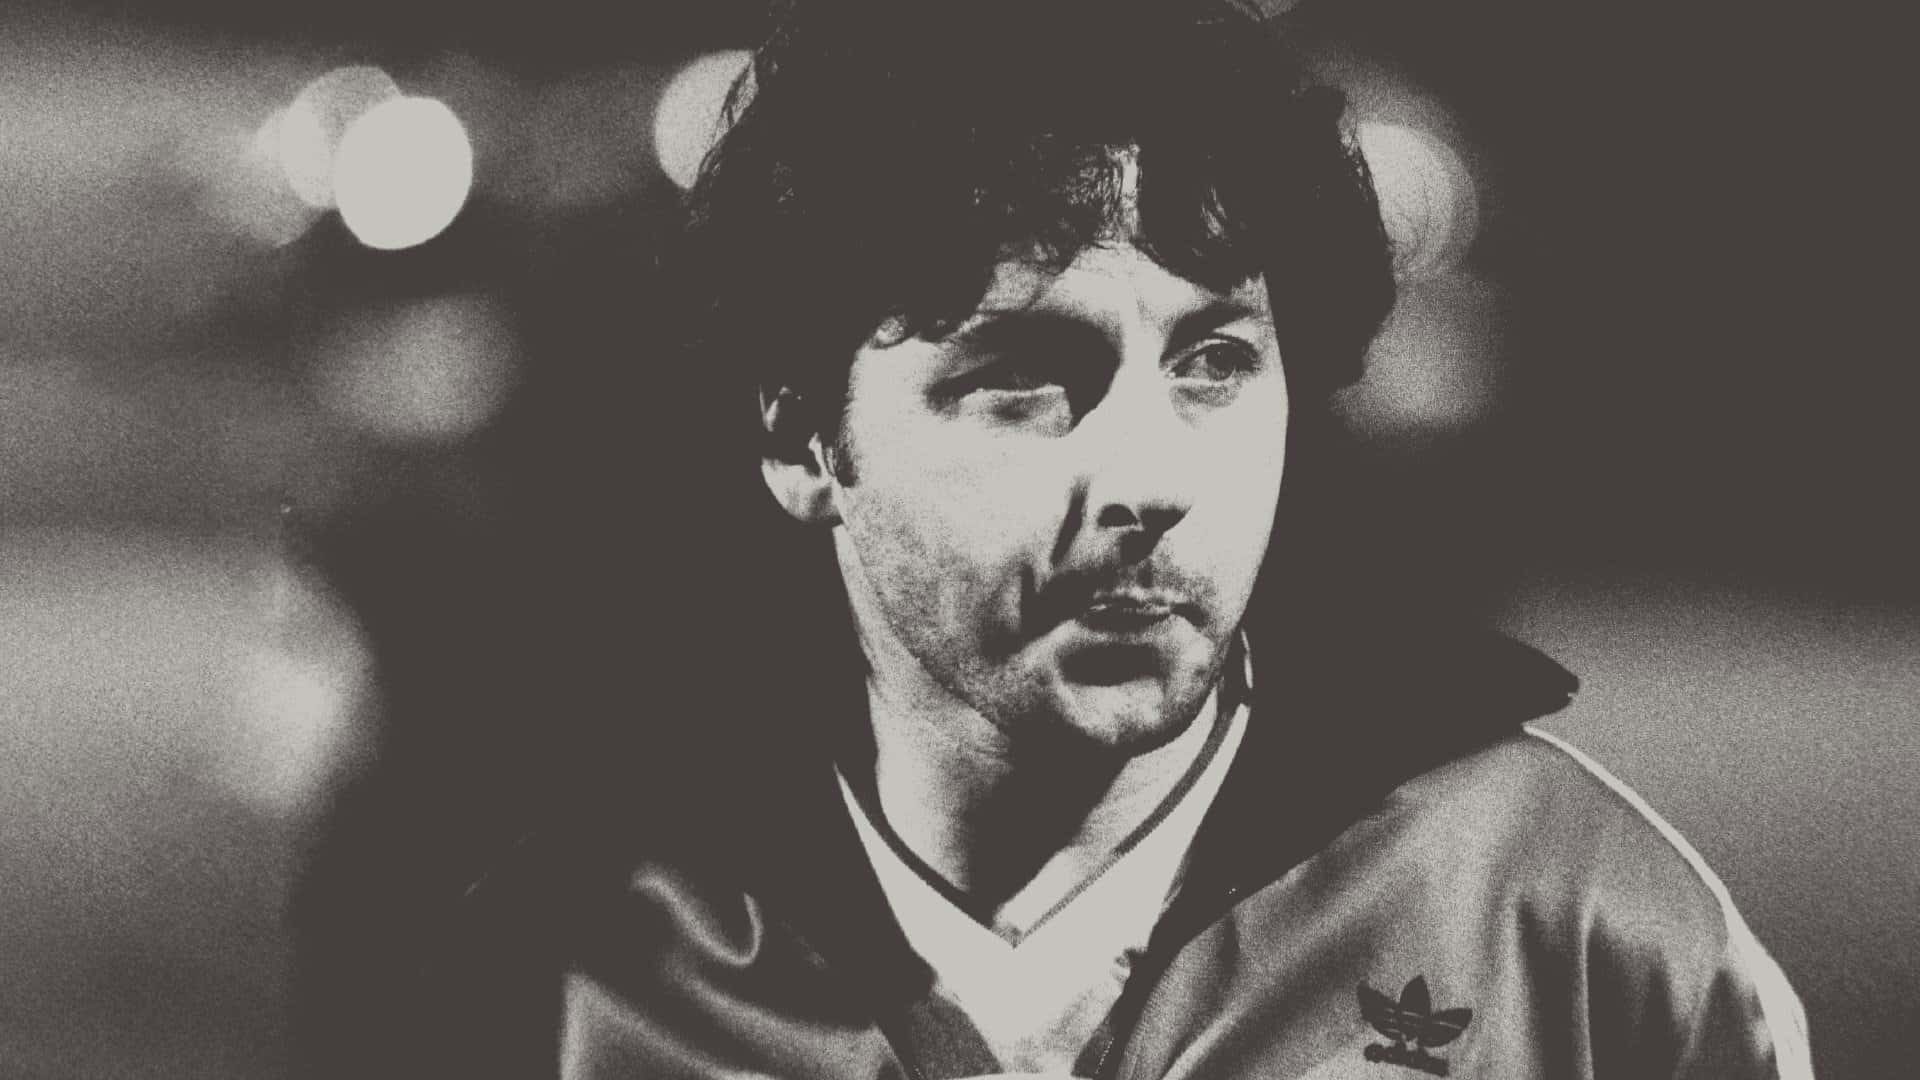 A black and white photo of Mickey Thomas in an Adidas tracksuit top looking ace